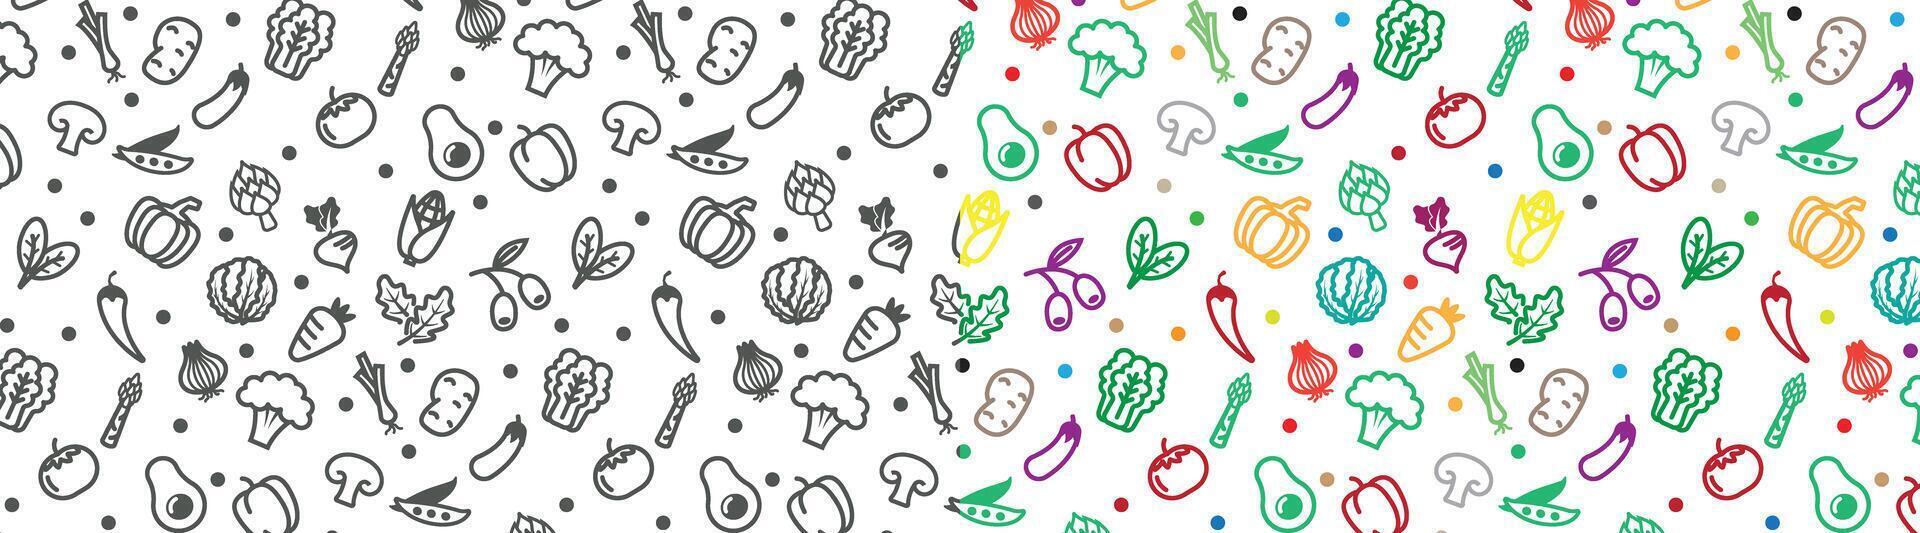 cute vegetable icons seamless pattern background for restaurant wallpaper. healthy food fresh salad vector